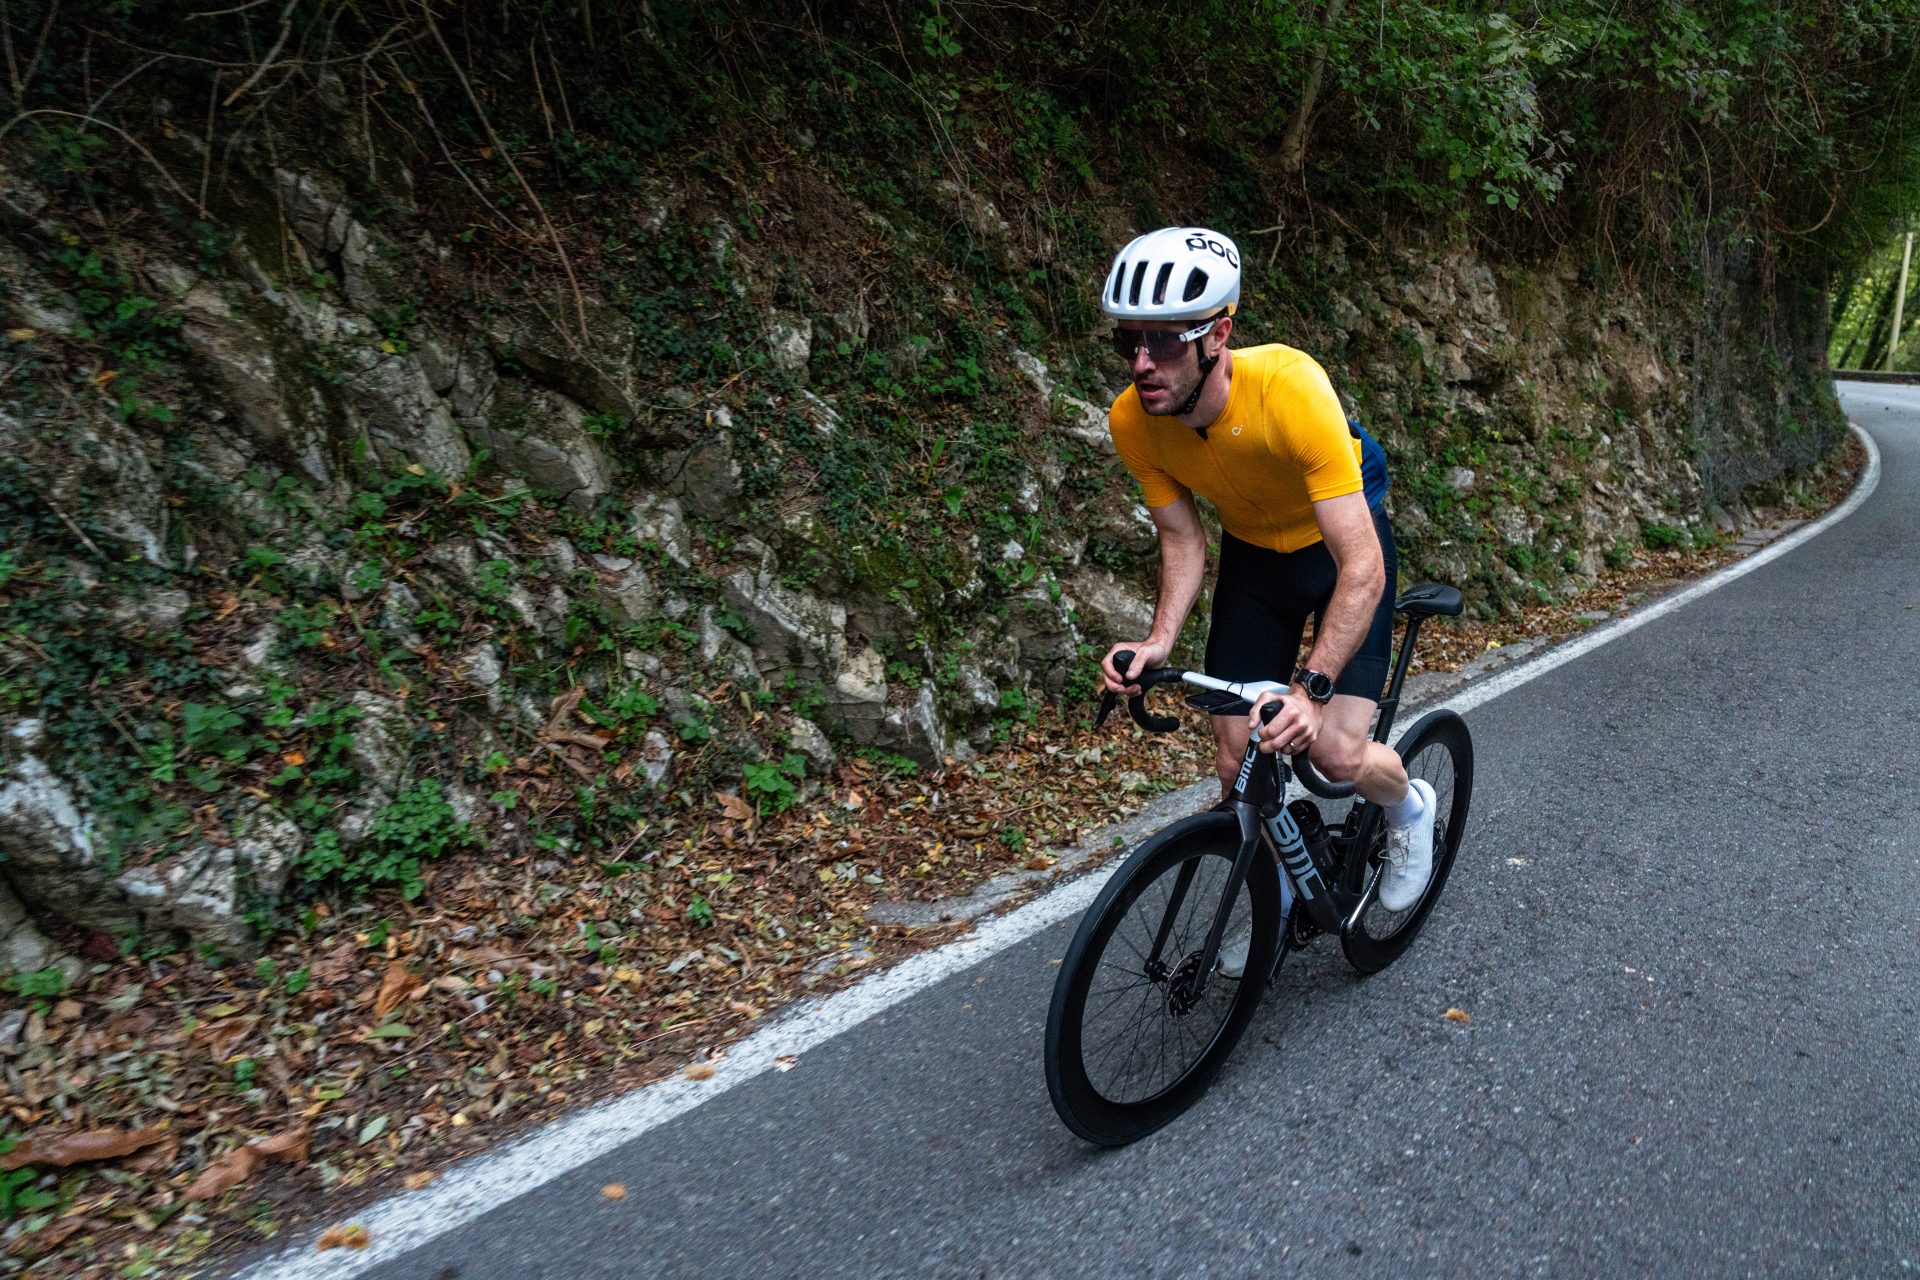 The photo shows the writer climbing out of the saddle on the new BMC TeamMachine R 01 on a quiet Italian road with an overgrown rock face along side the road.